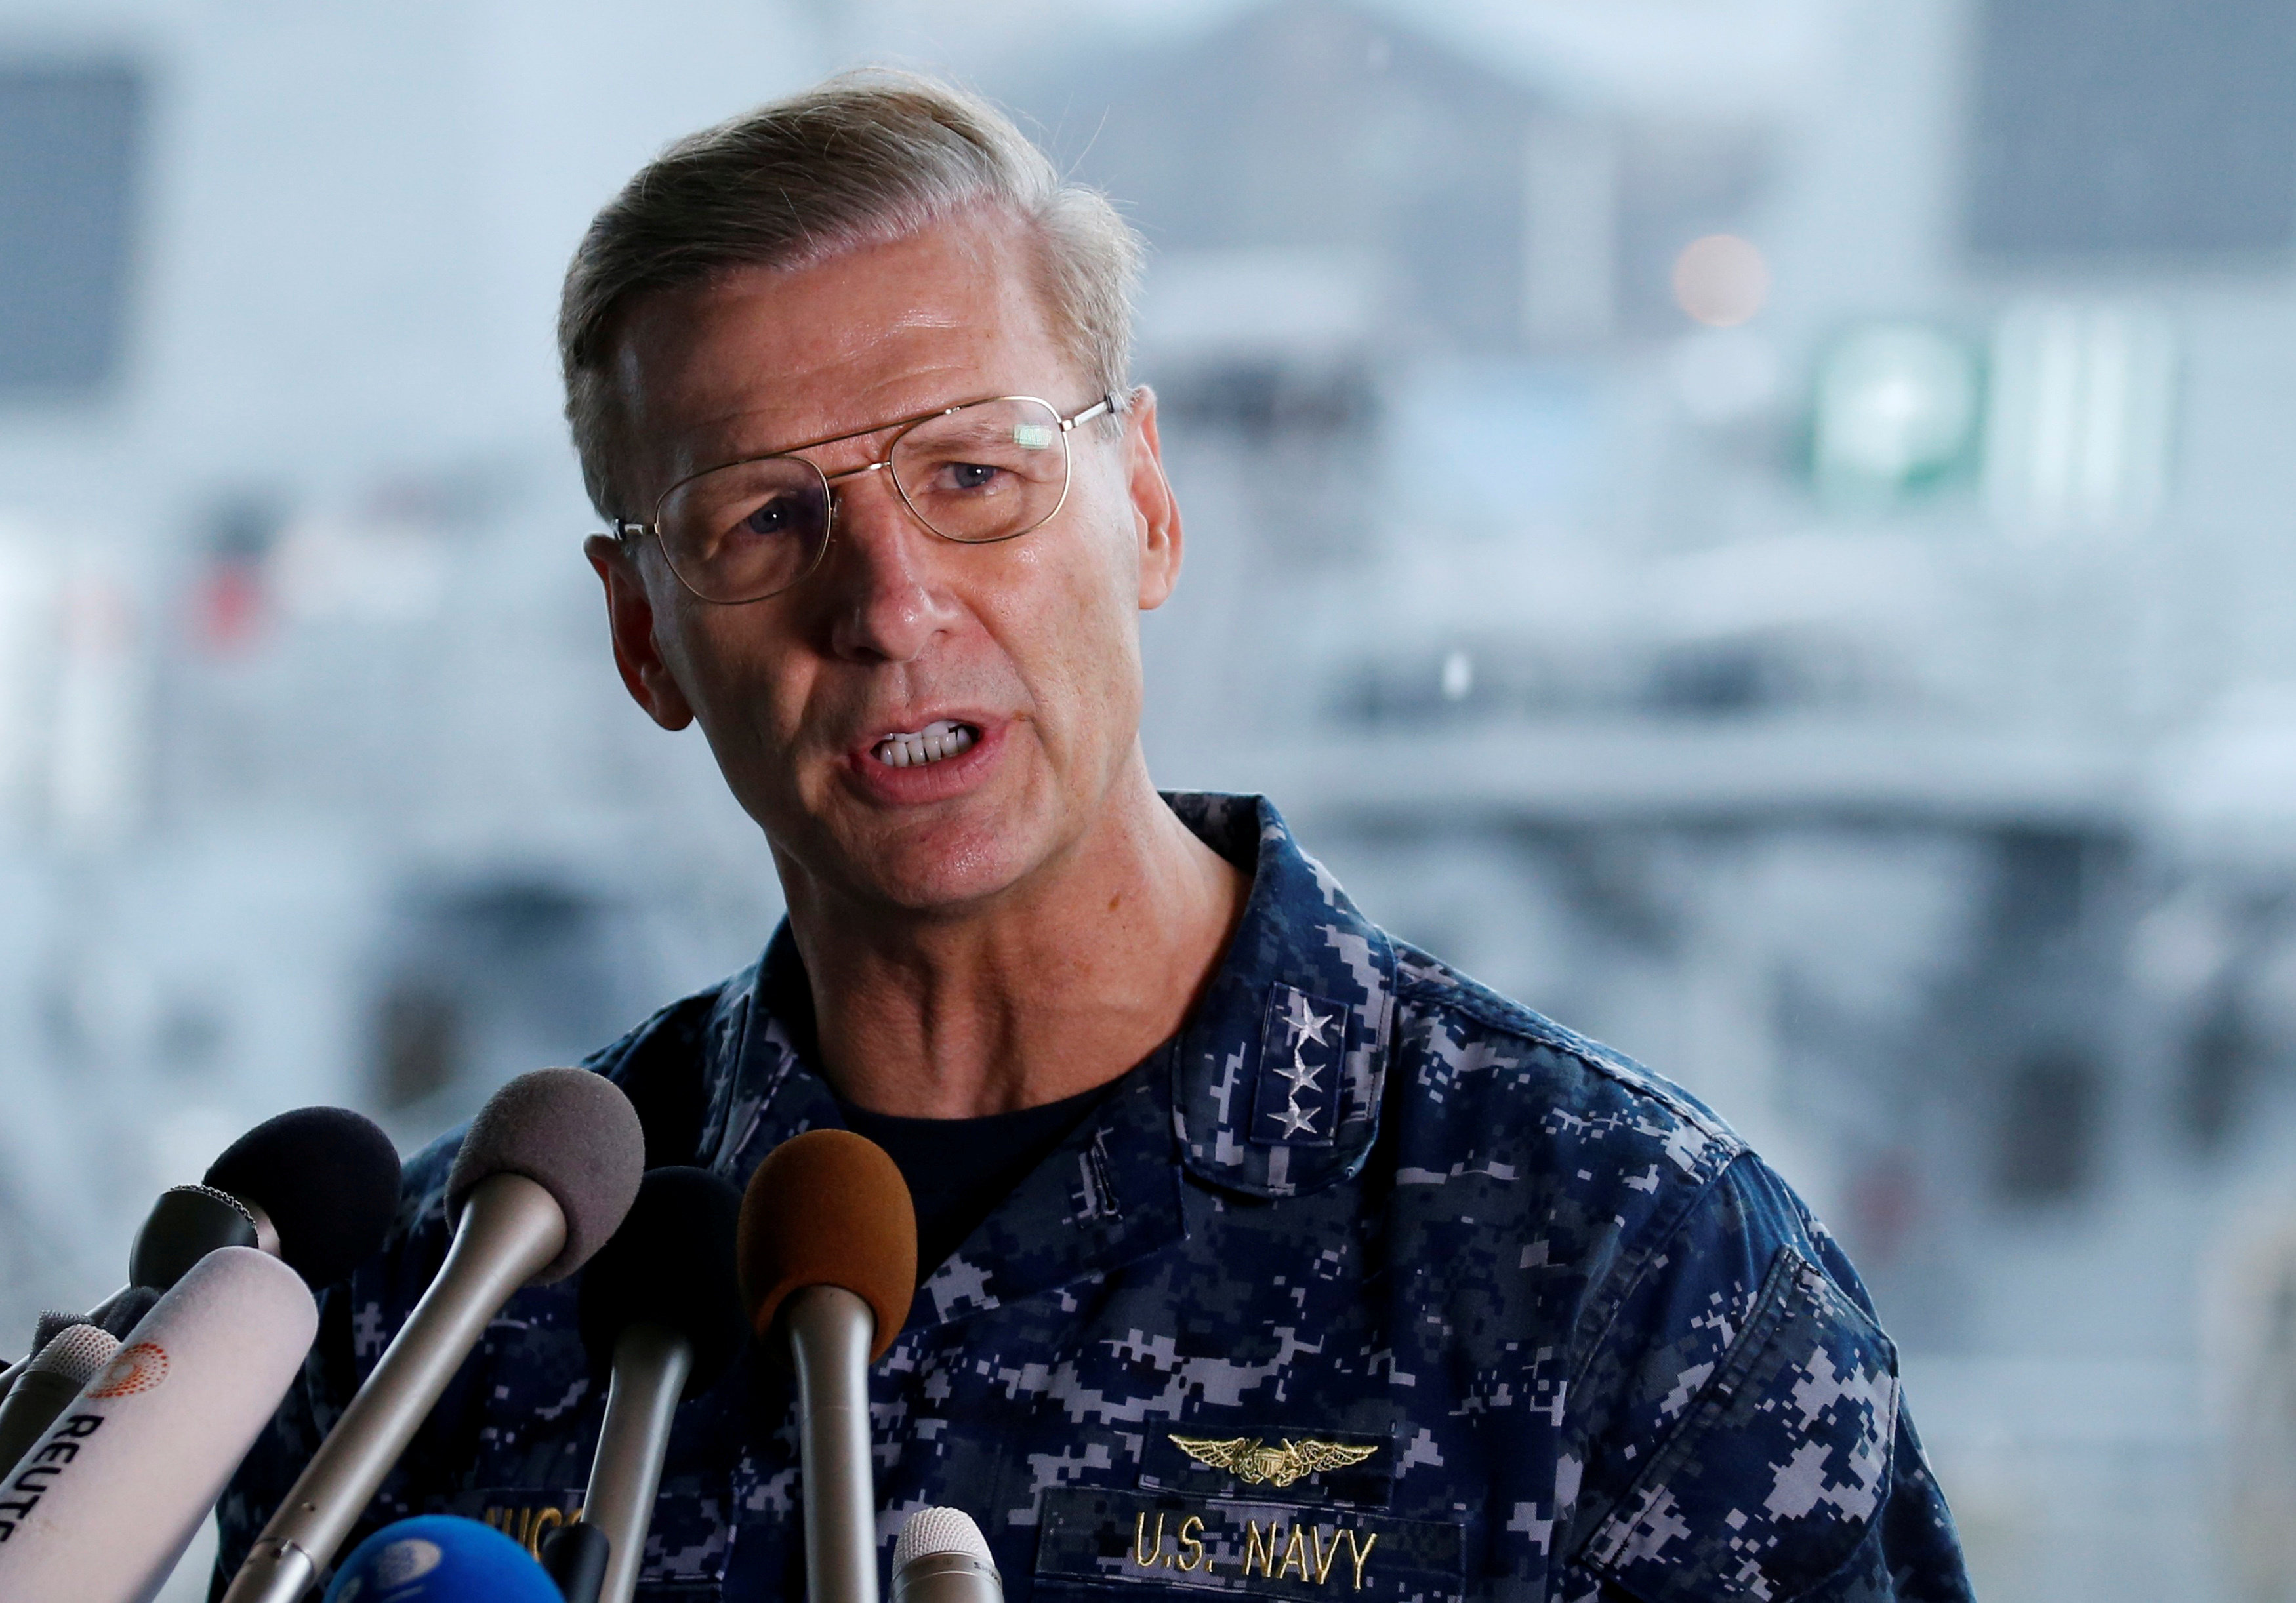 U.S. Navy relieves Seventh Fleet commander after series of collisions in Asia